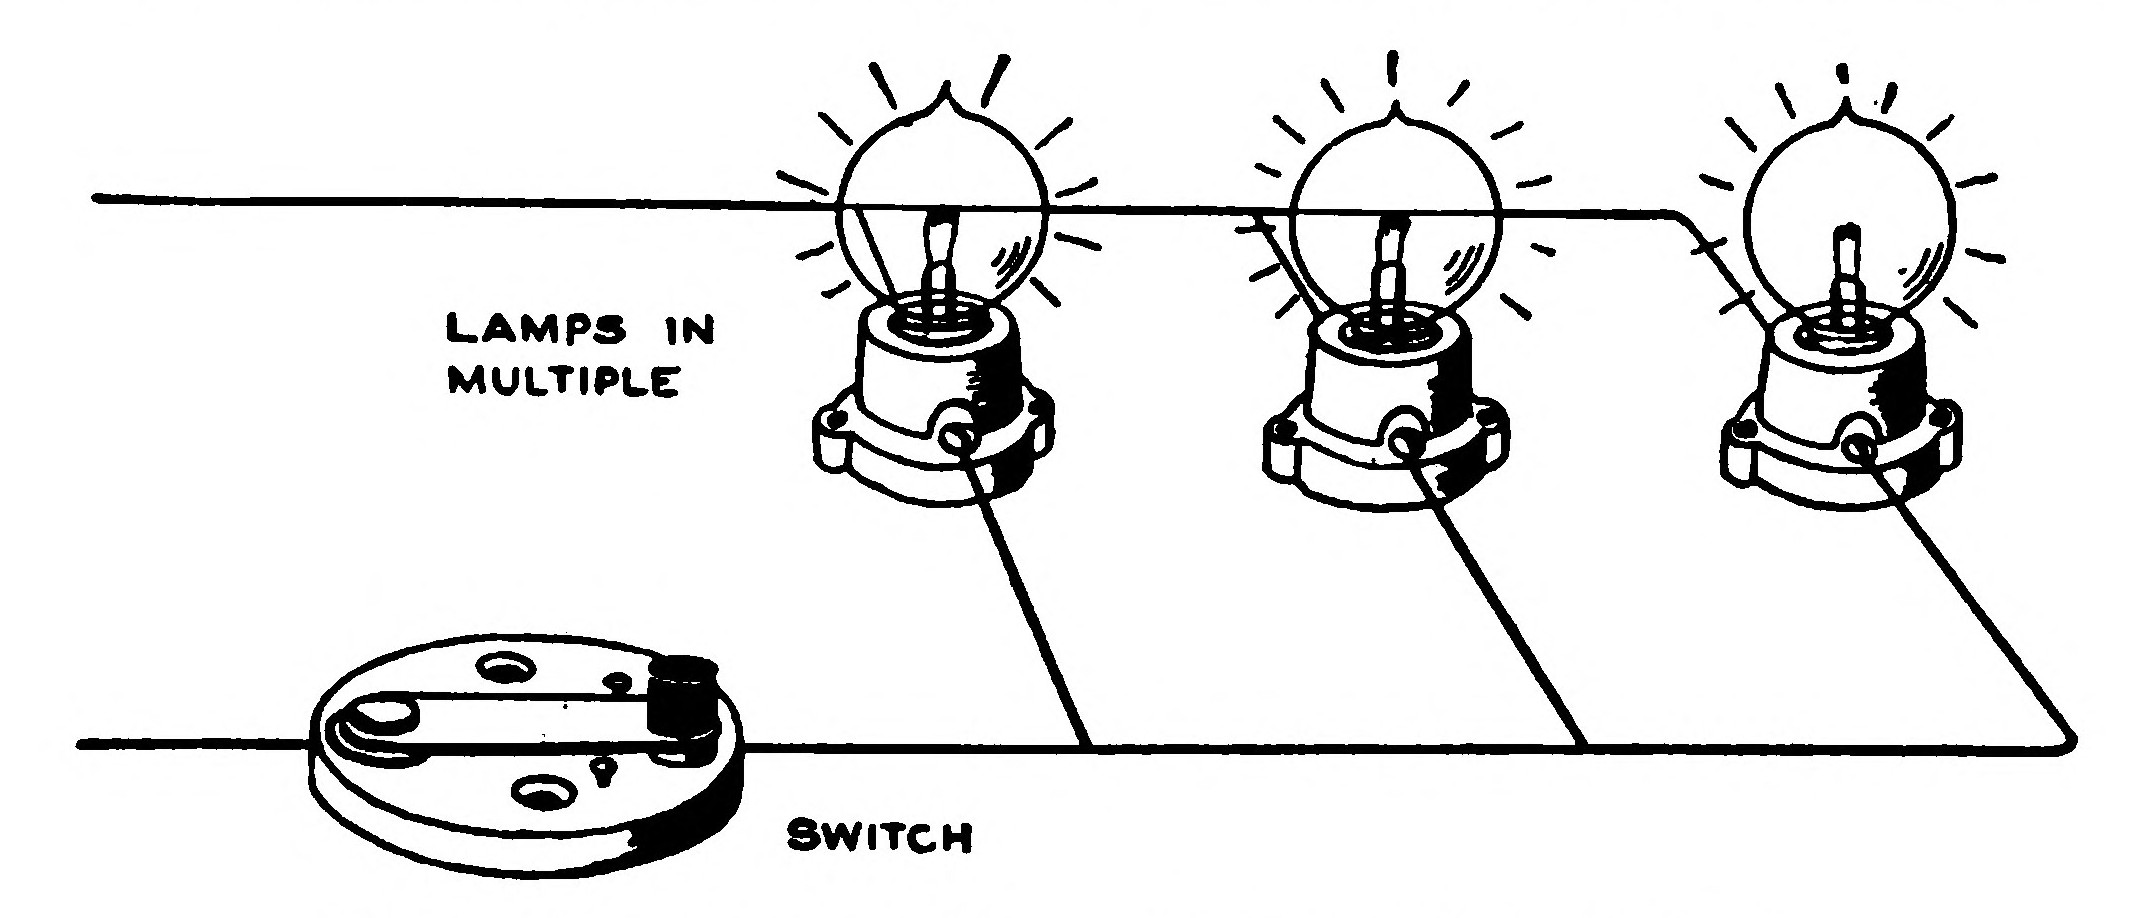 FIG. 159.—Lamps Controlled by One Switch.